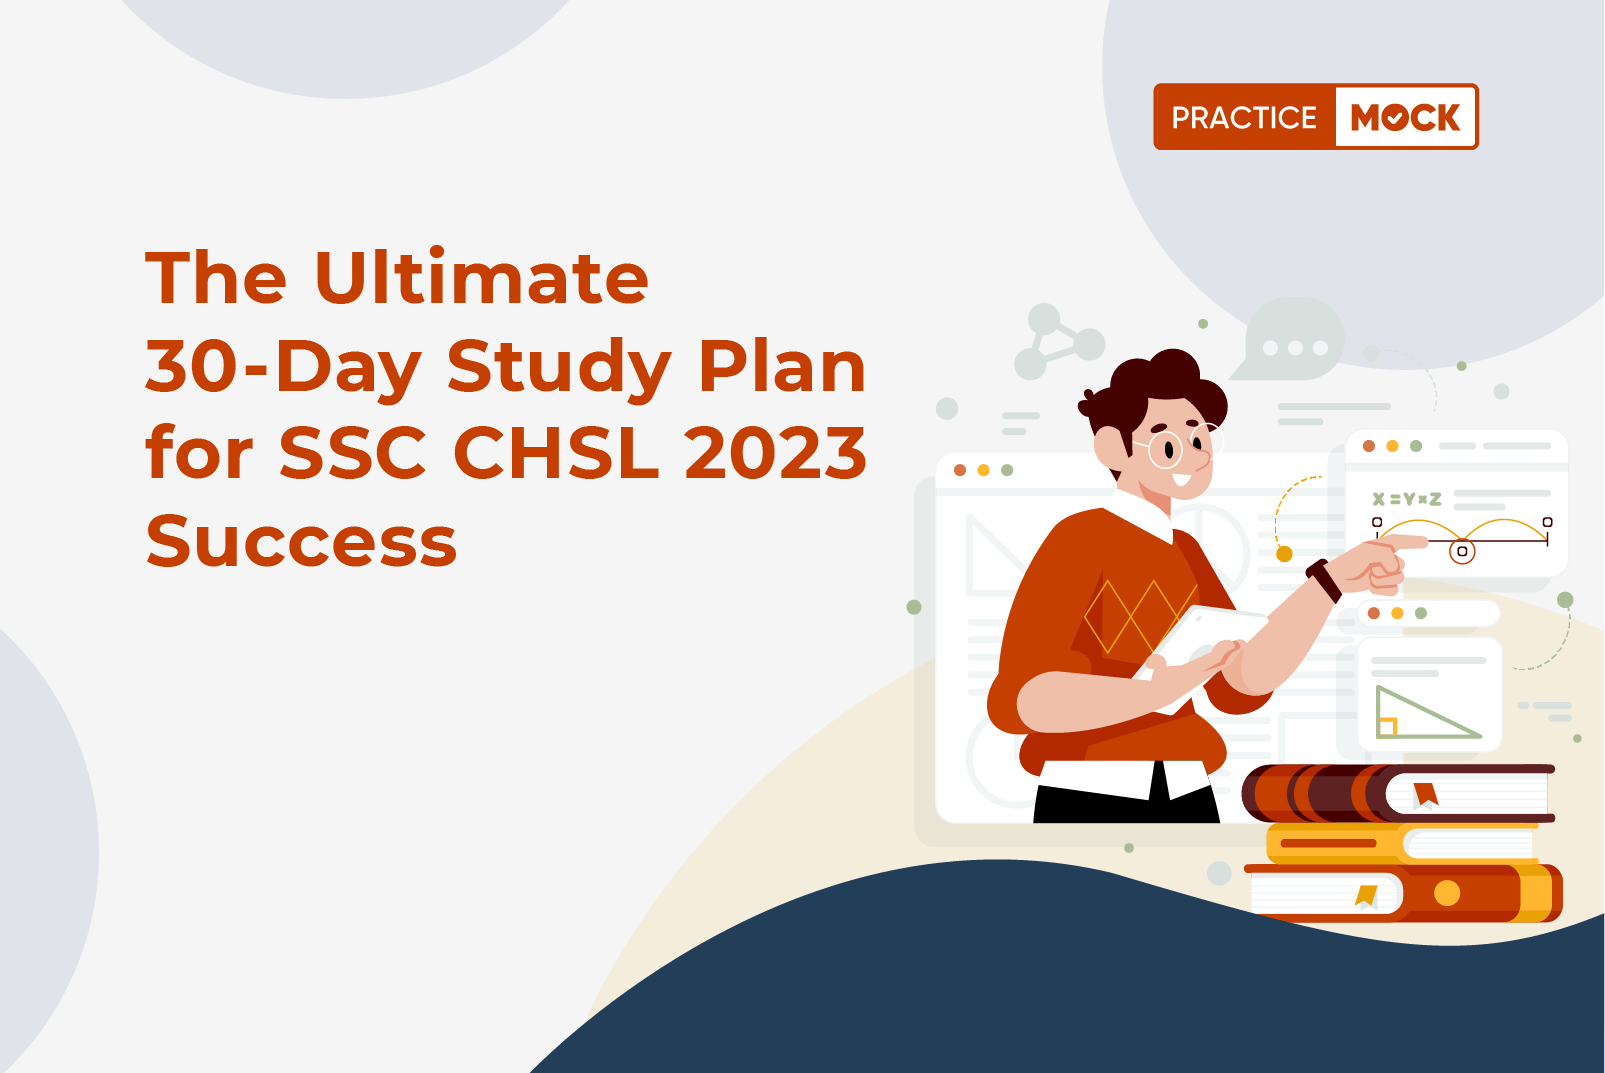 The Ultimate 30-Day Study Plan for SSC CHSL 2023 Success